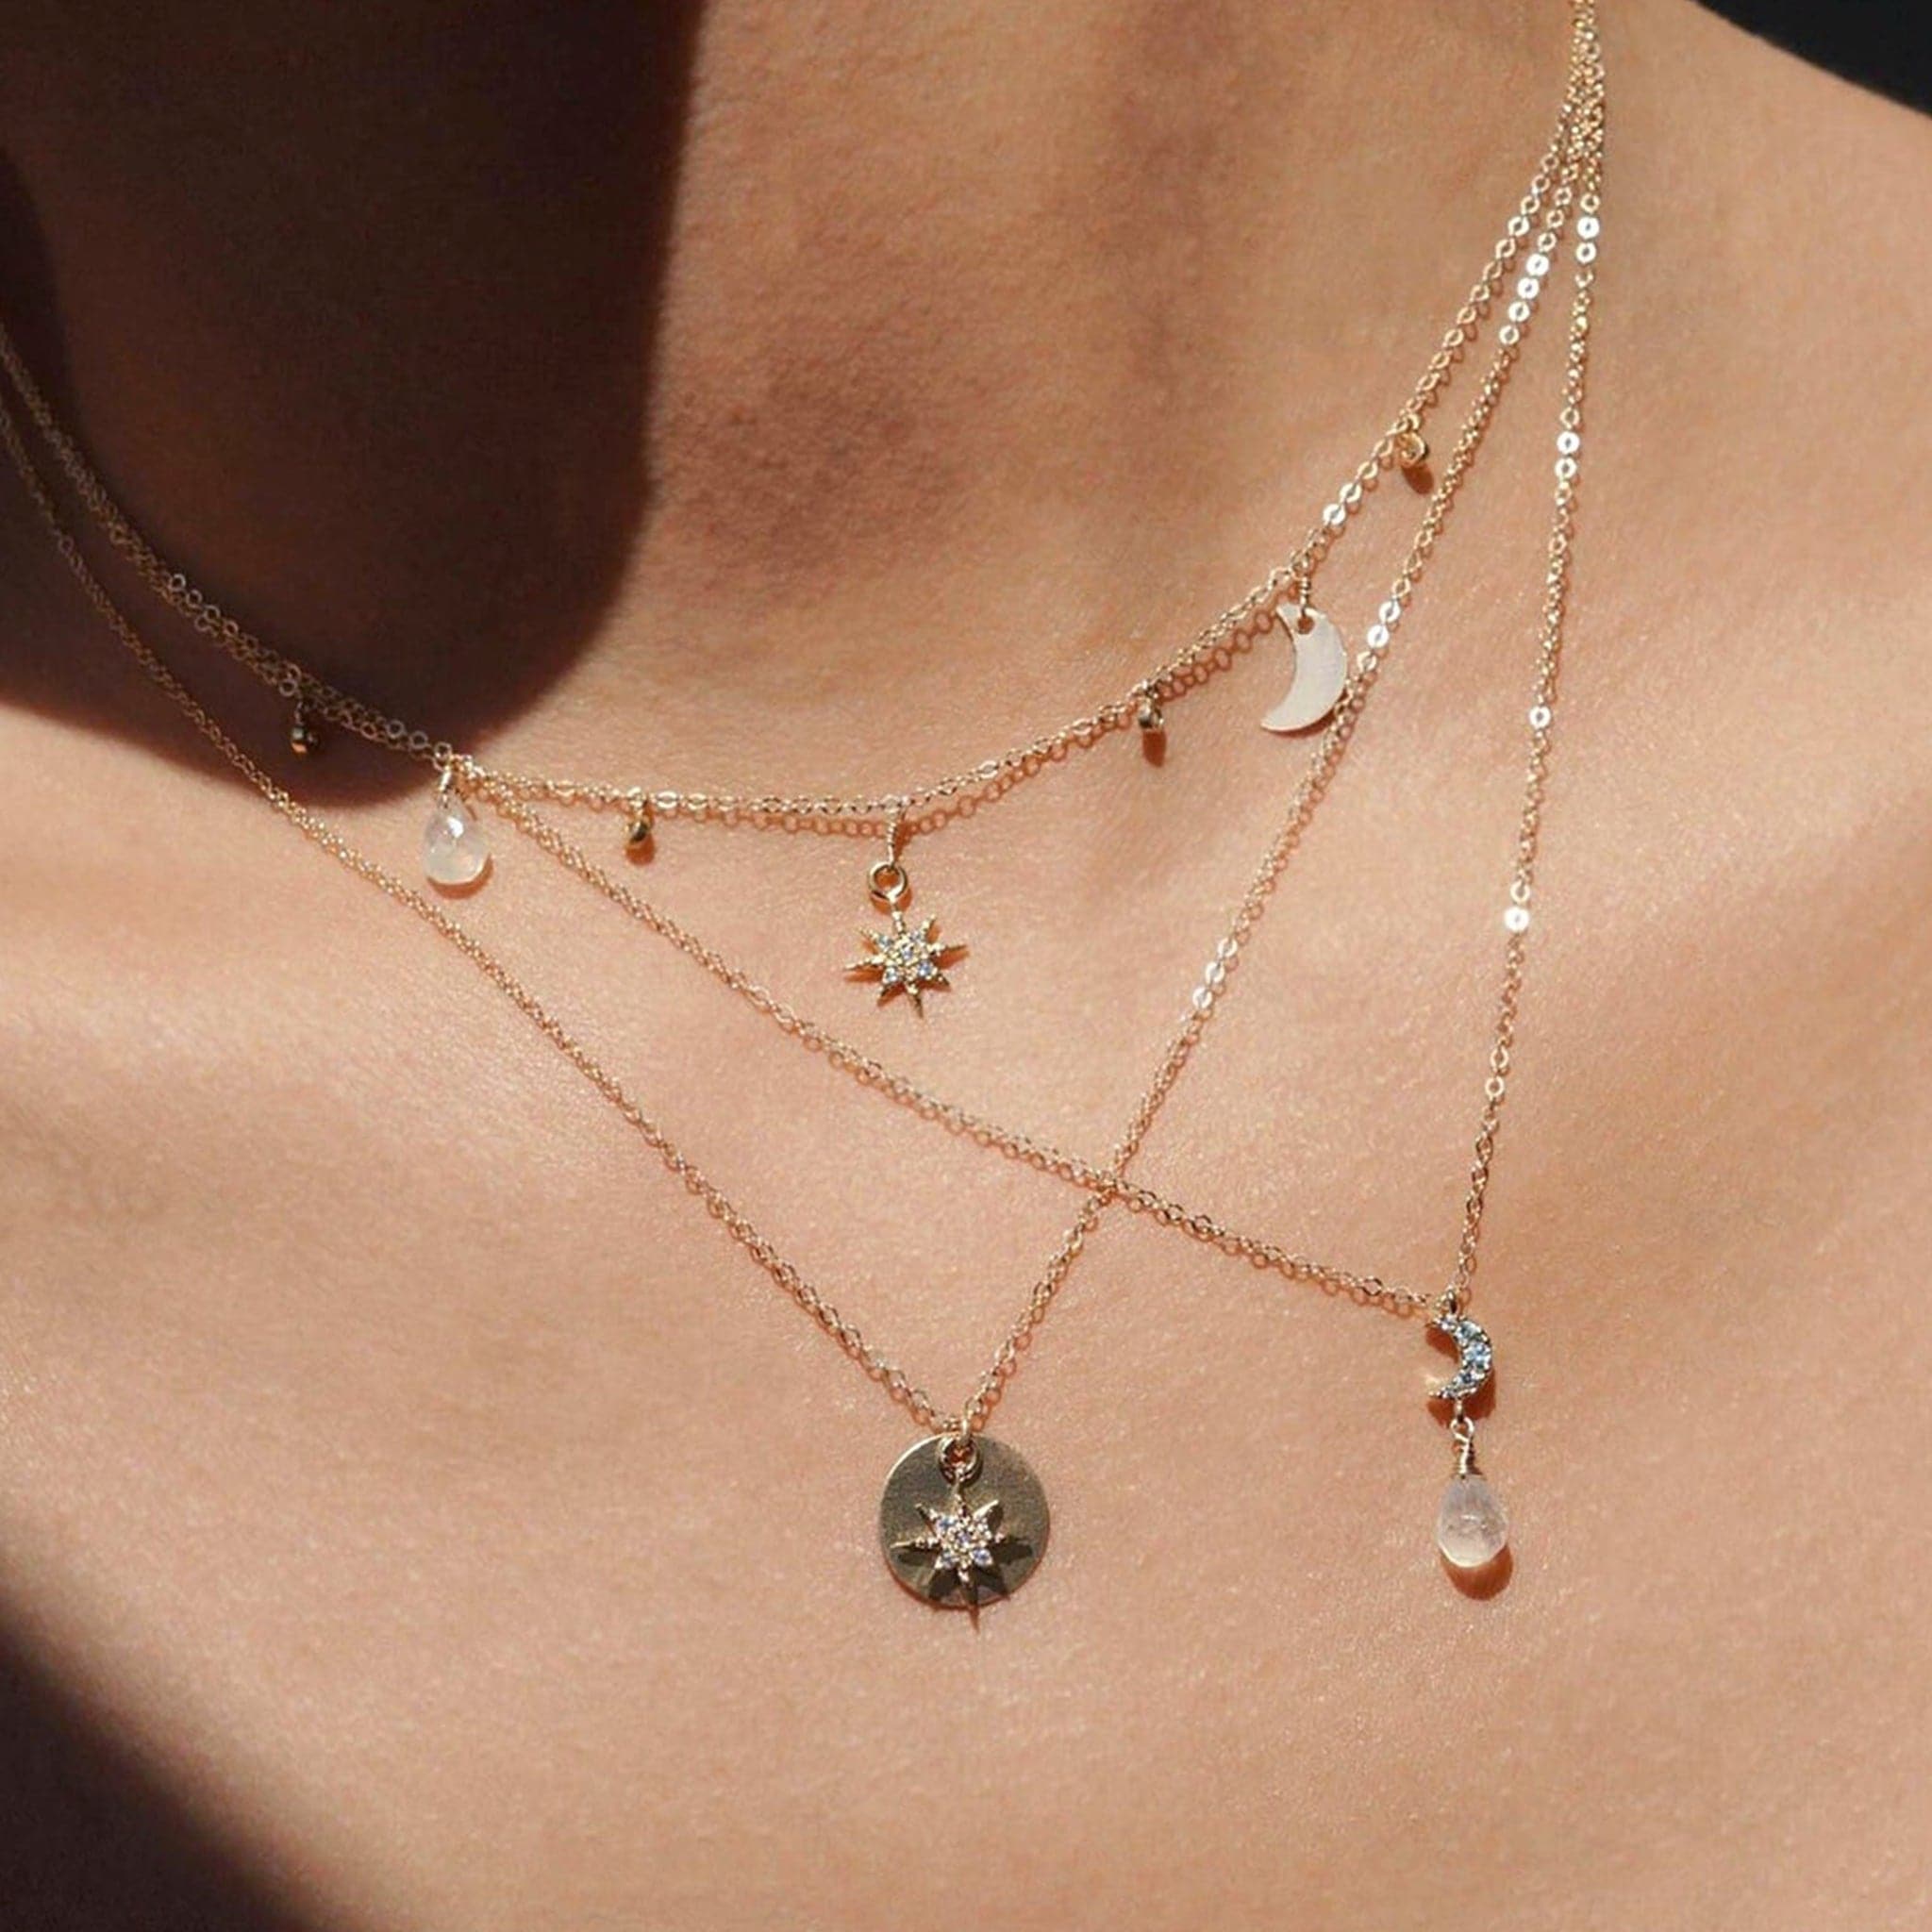 Close up of three layered necklaces being worn. One is a gold choker with star, moon, and white gem charms. One necklace is a long gold necklace with silver gem moon with white gem drop. The adenna necklace is the third necklace. Long gold chain and circle pendant with crystal gemmed star charm.